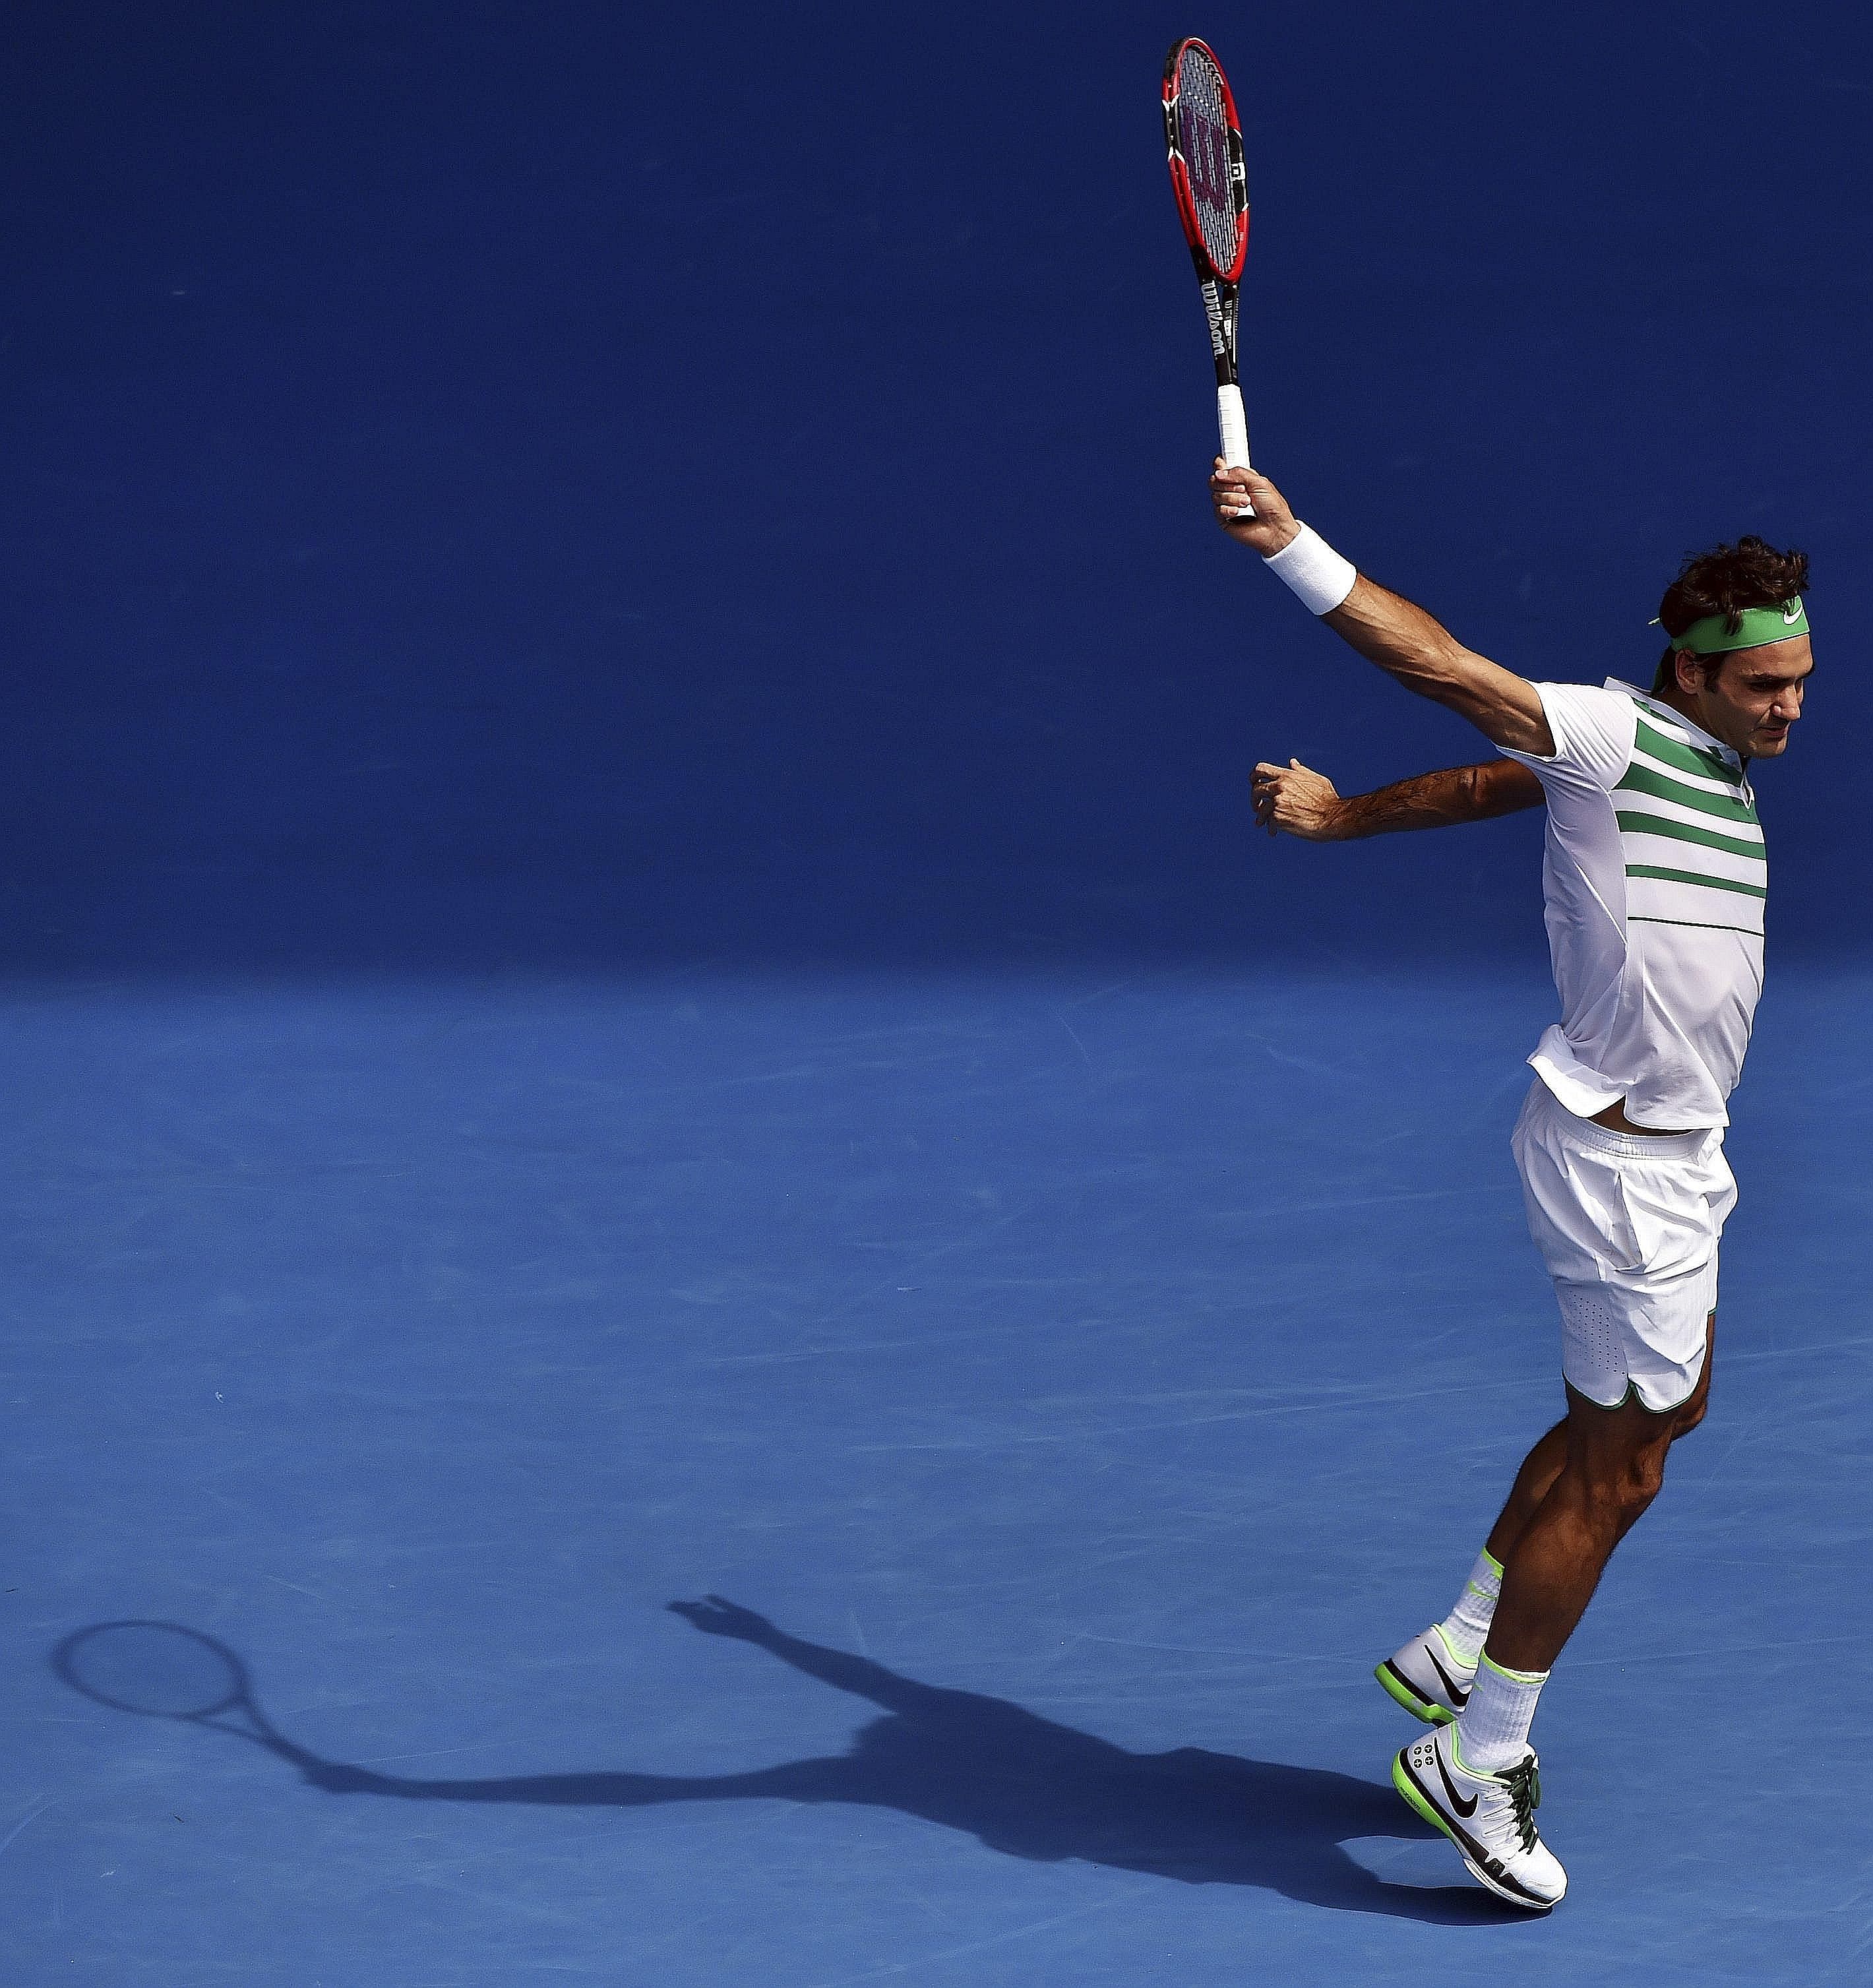 Roger Federer combines poise, balance and grace in his follow-through to a backhand in his Australian Open quarter-final against Tomas Berdych of the Czech Republic at the Australian Open yesterday. Federer dropped his opening service game but won 7-